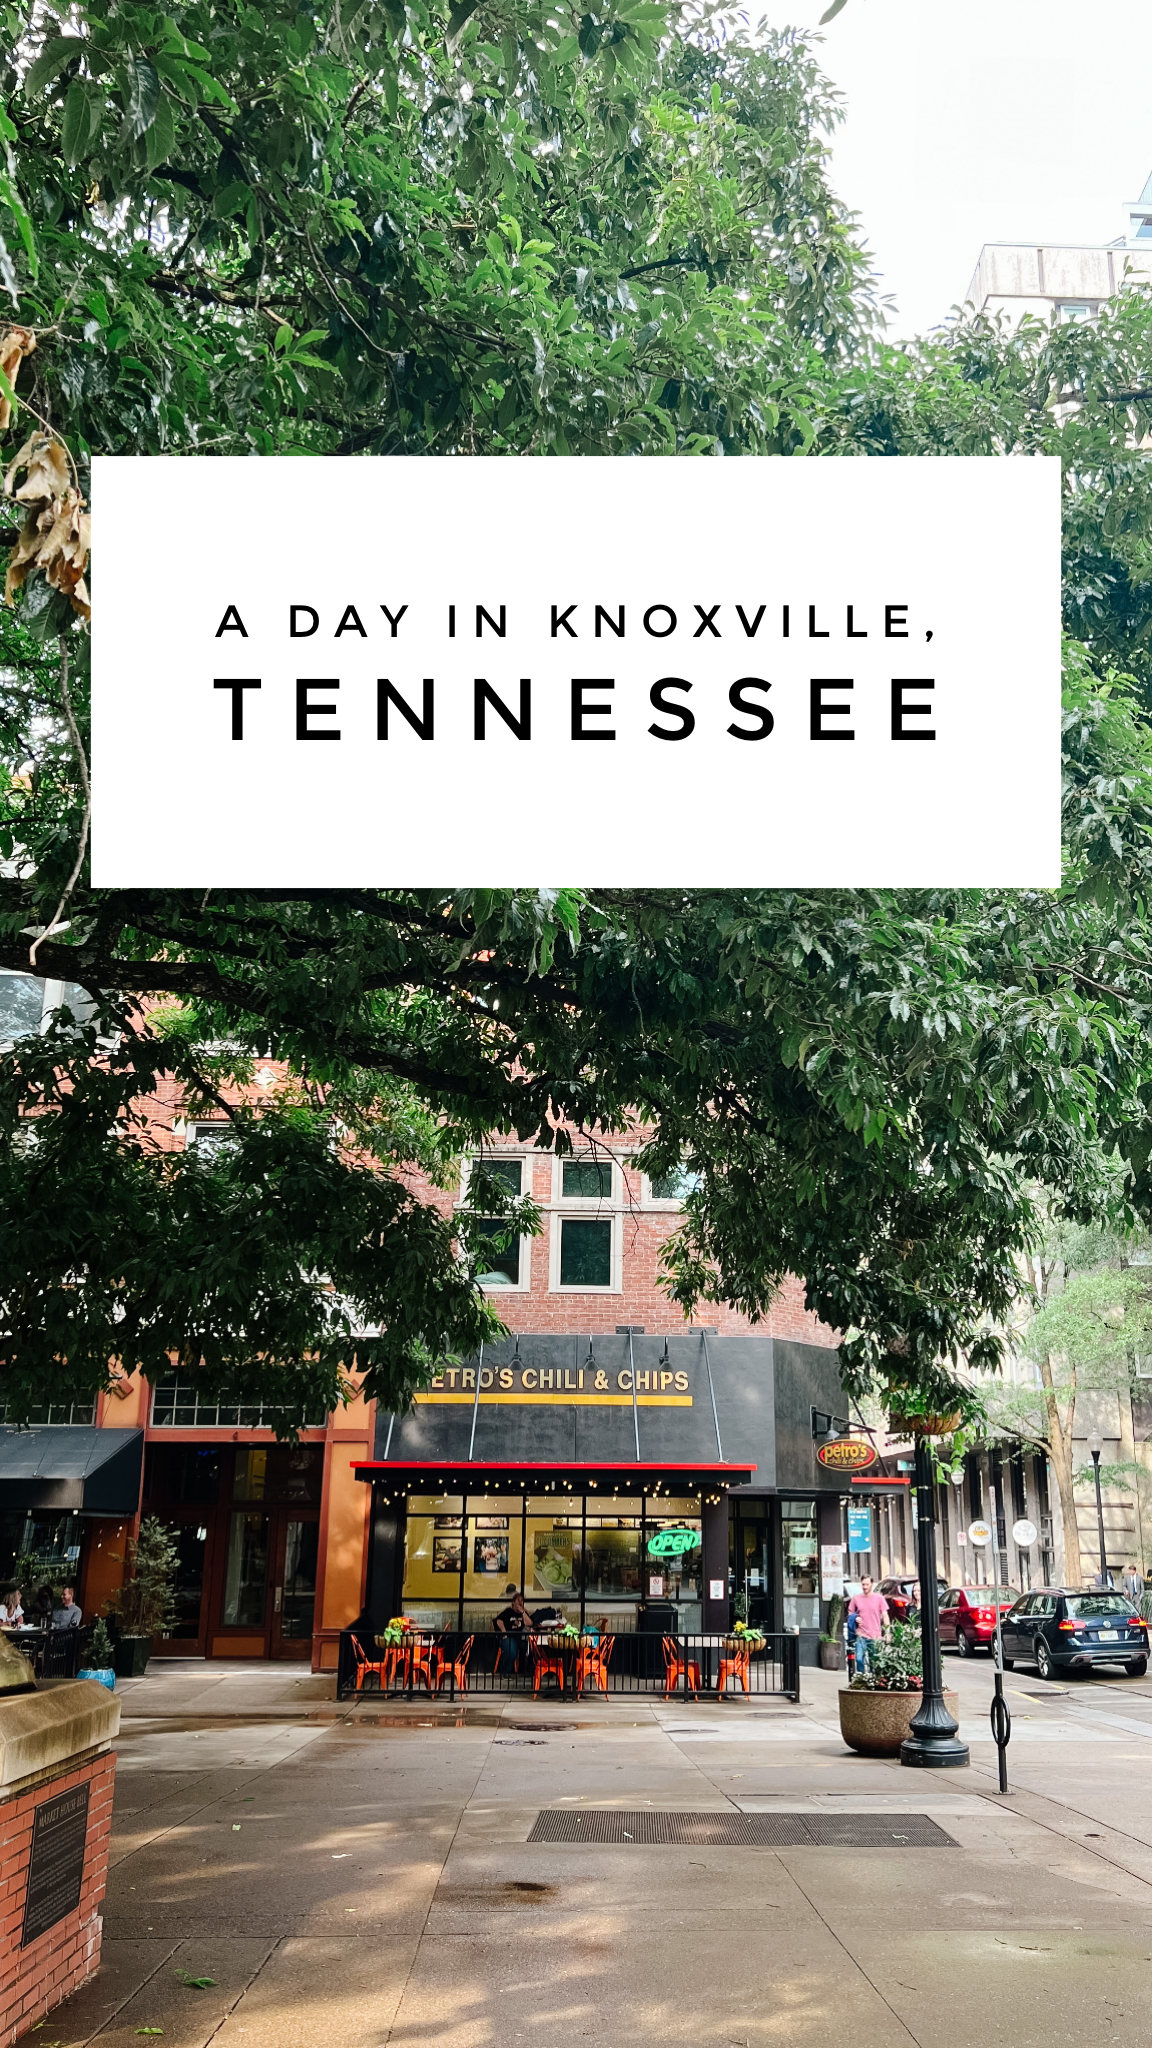 A Day in Knoxville, Tennessee - A Thoughtful Place